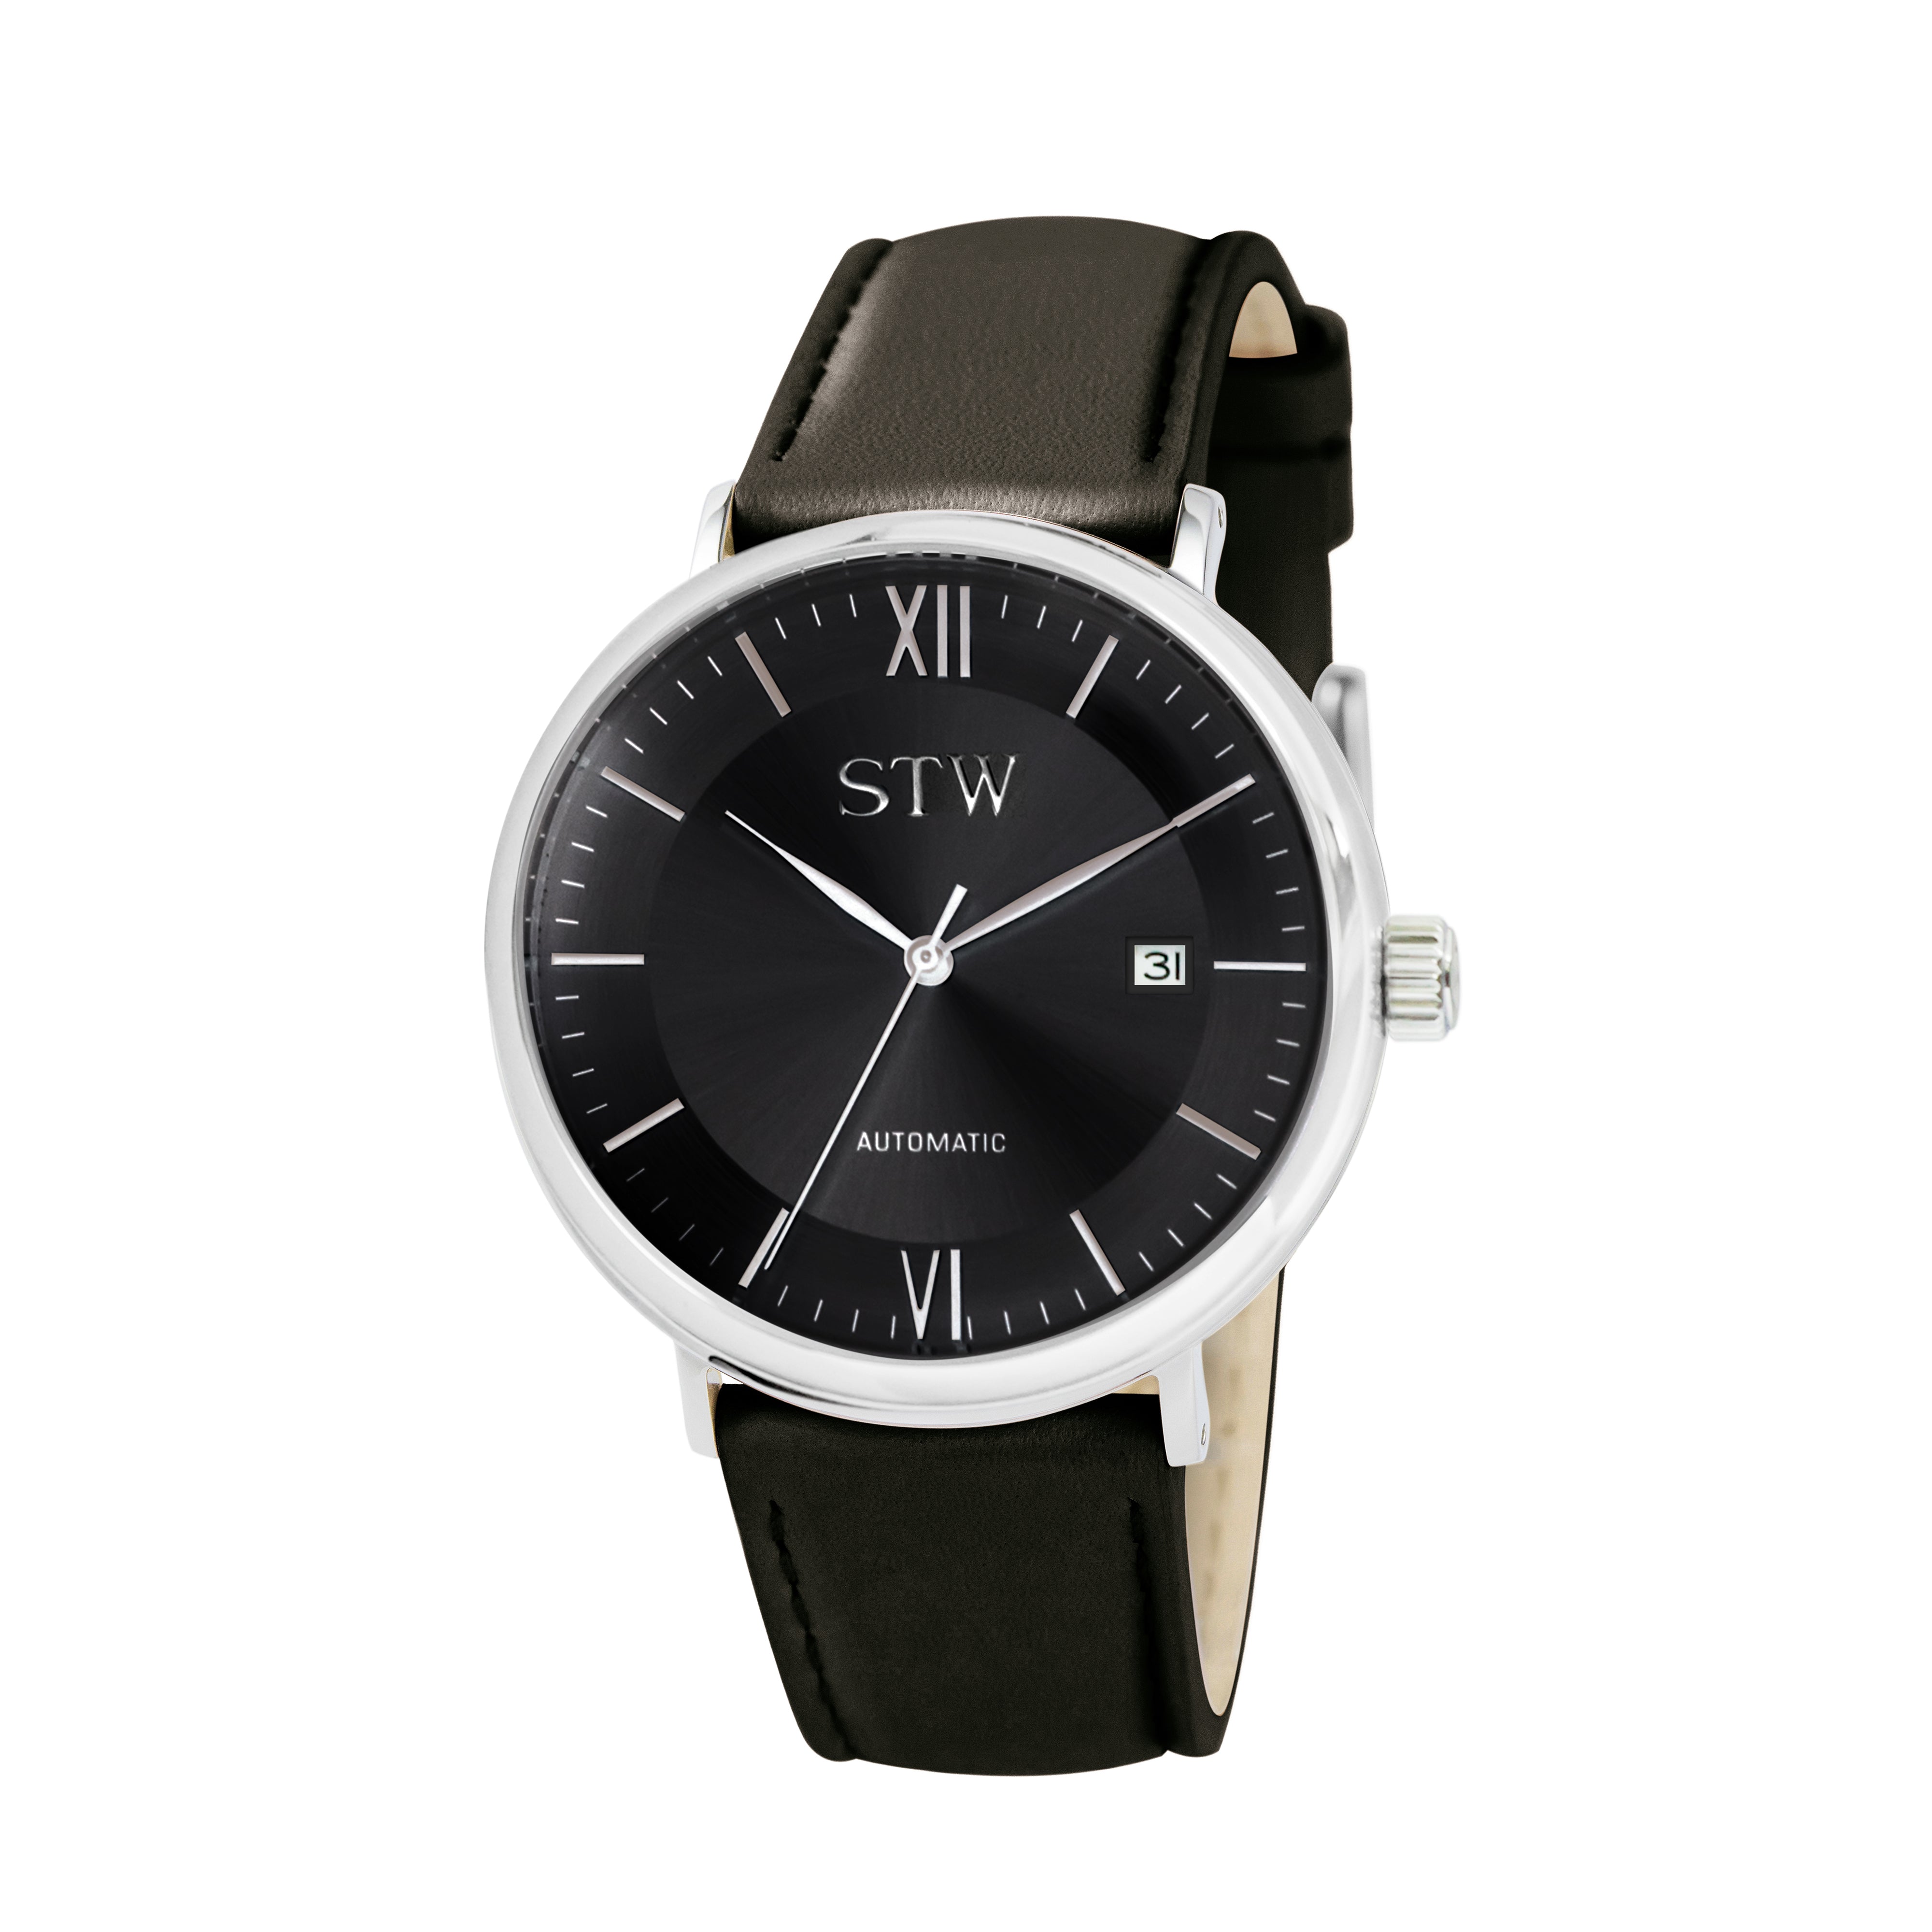 THE AUTO -  BLACK DIAL / BLACK LEATHER STRAP WATCH